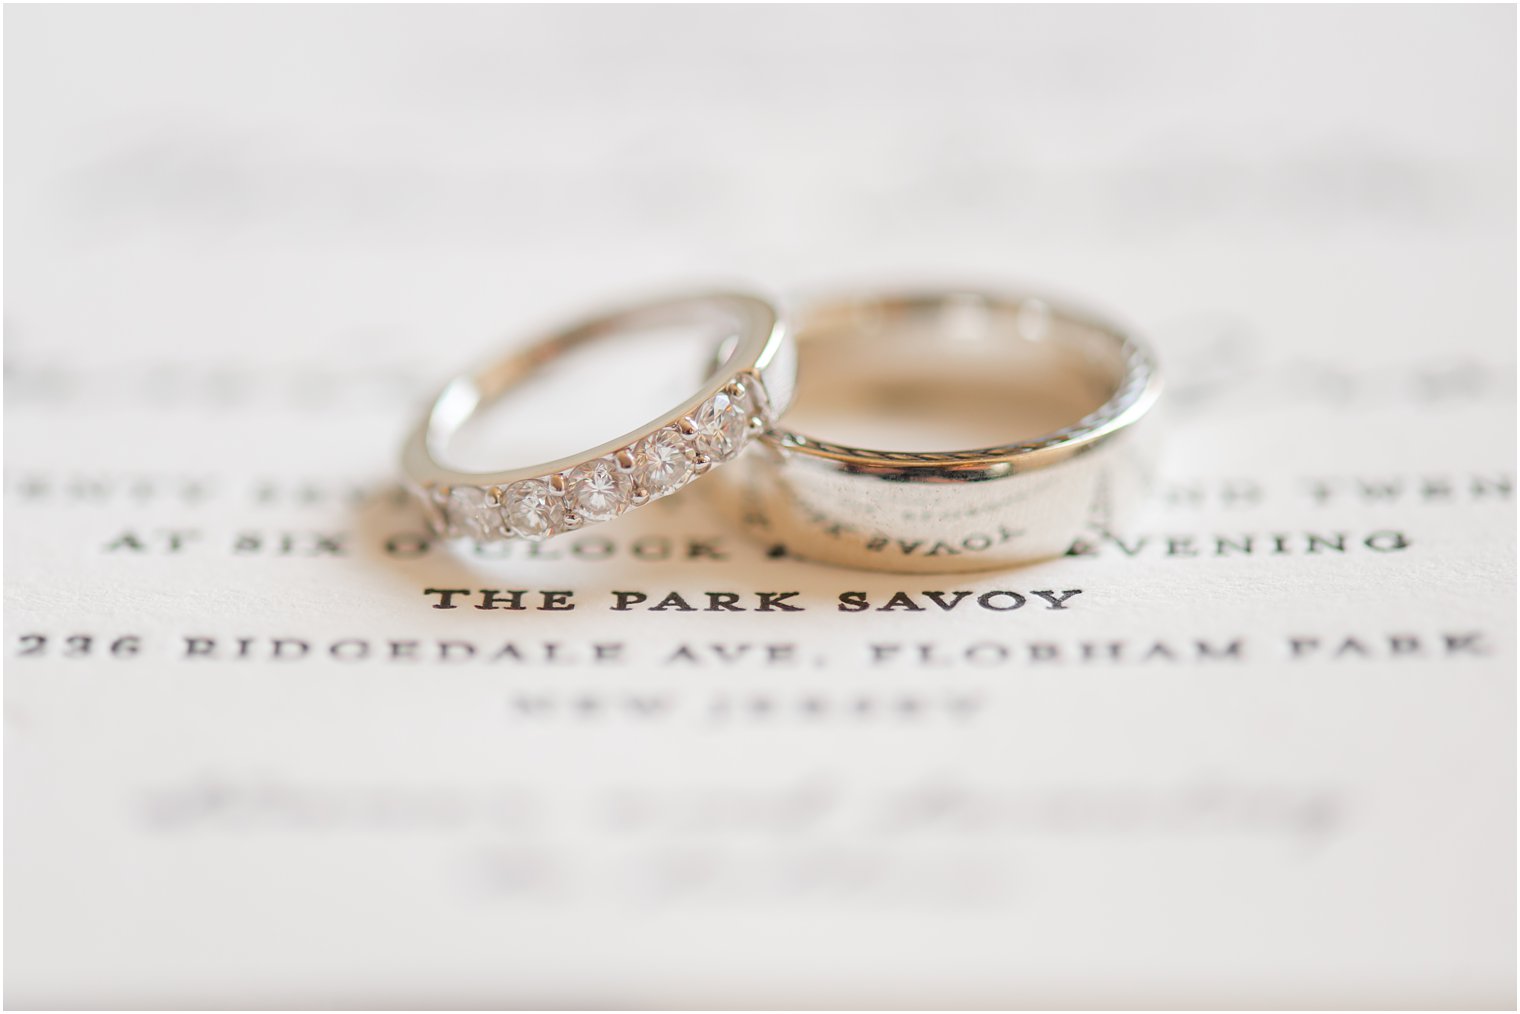 wedding bands rest on wedding invitation for The Park Savoy 